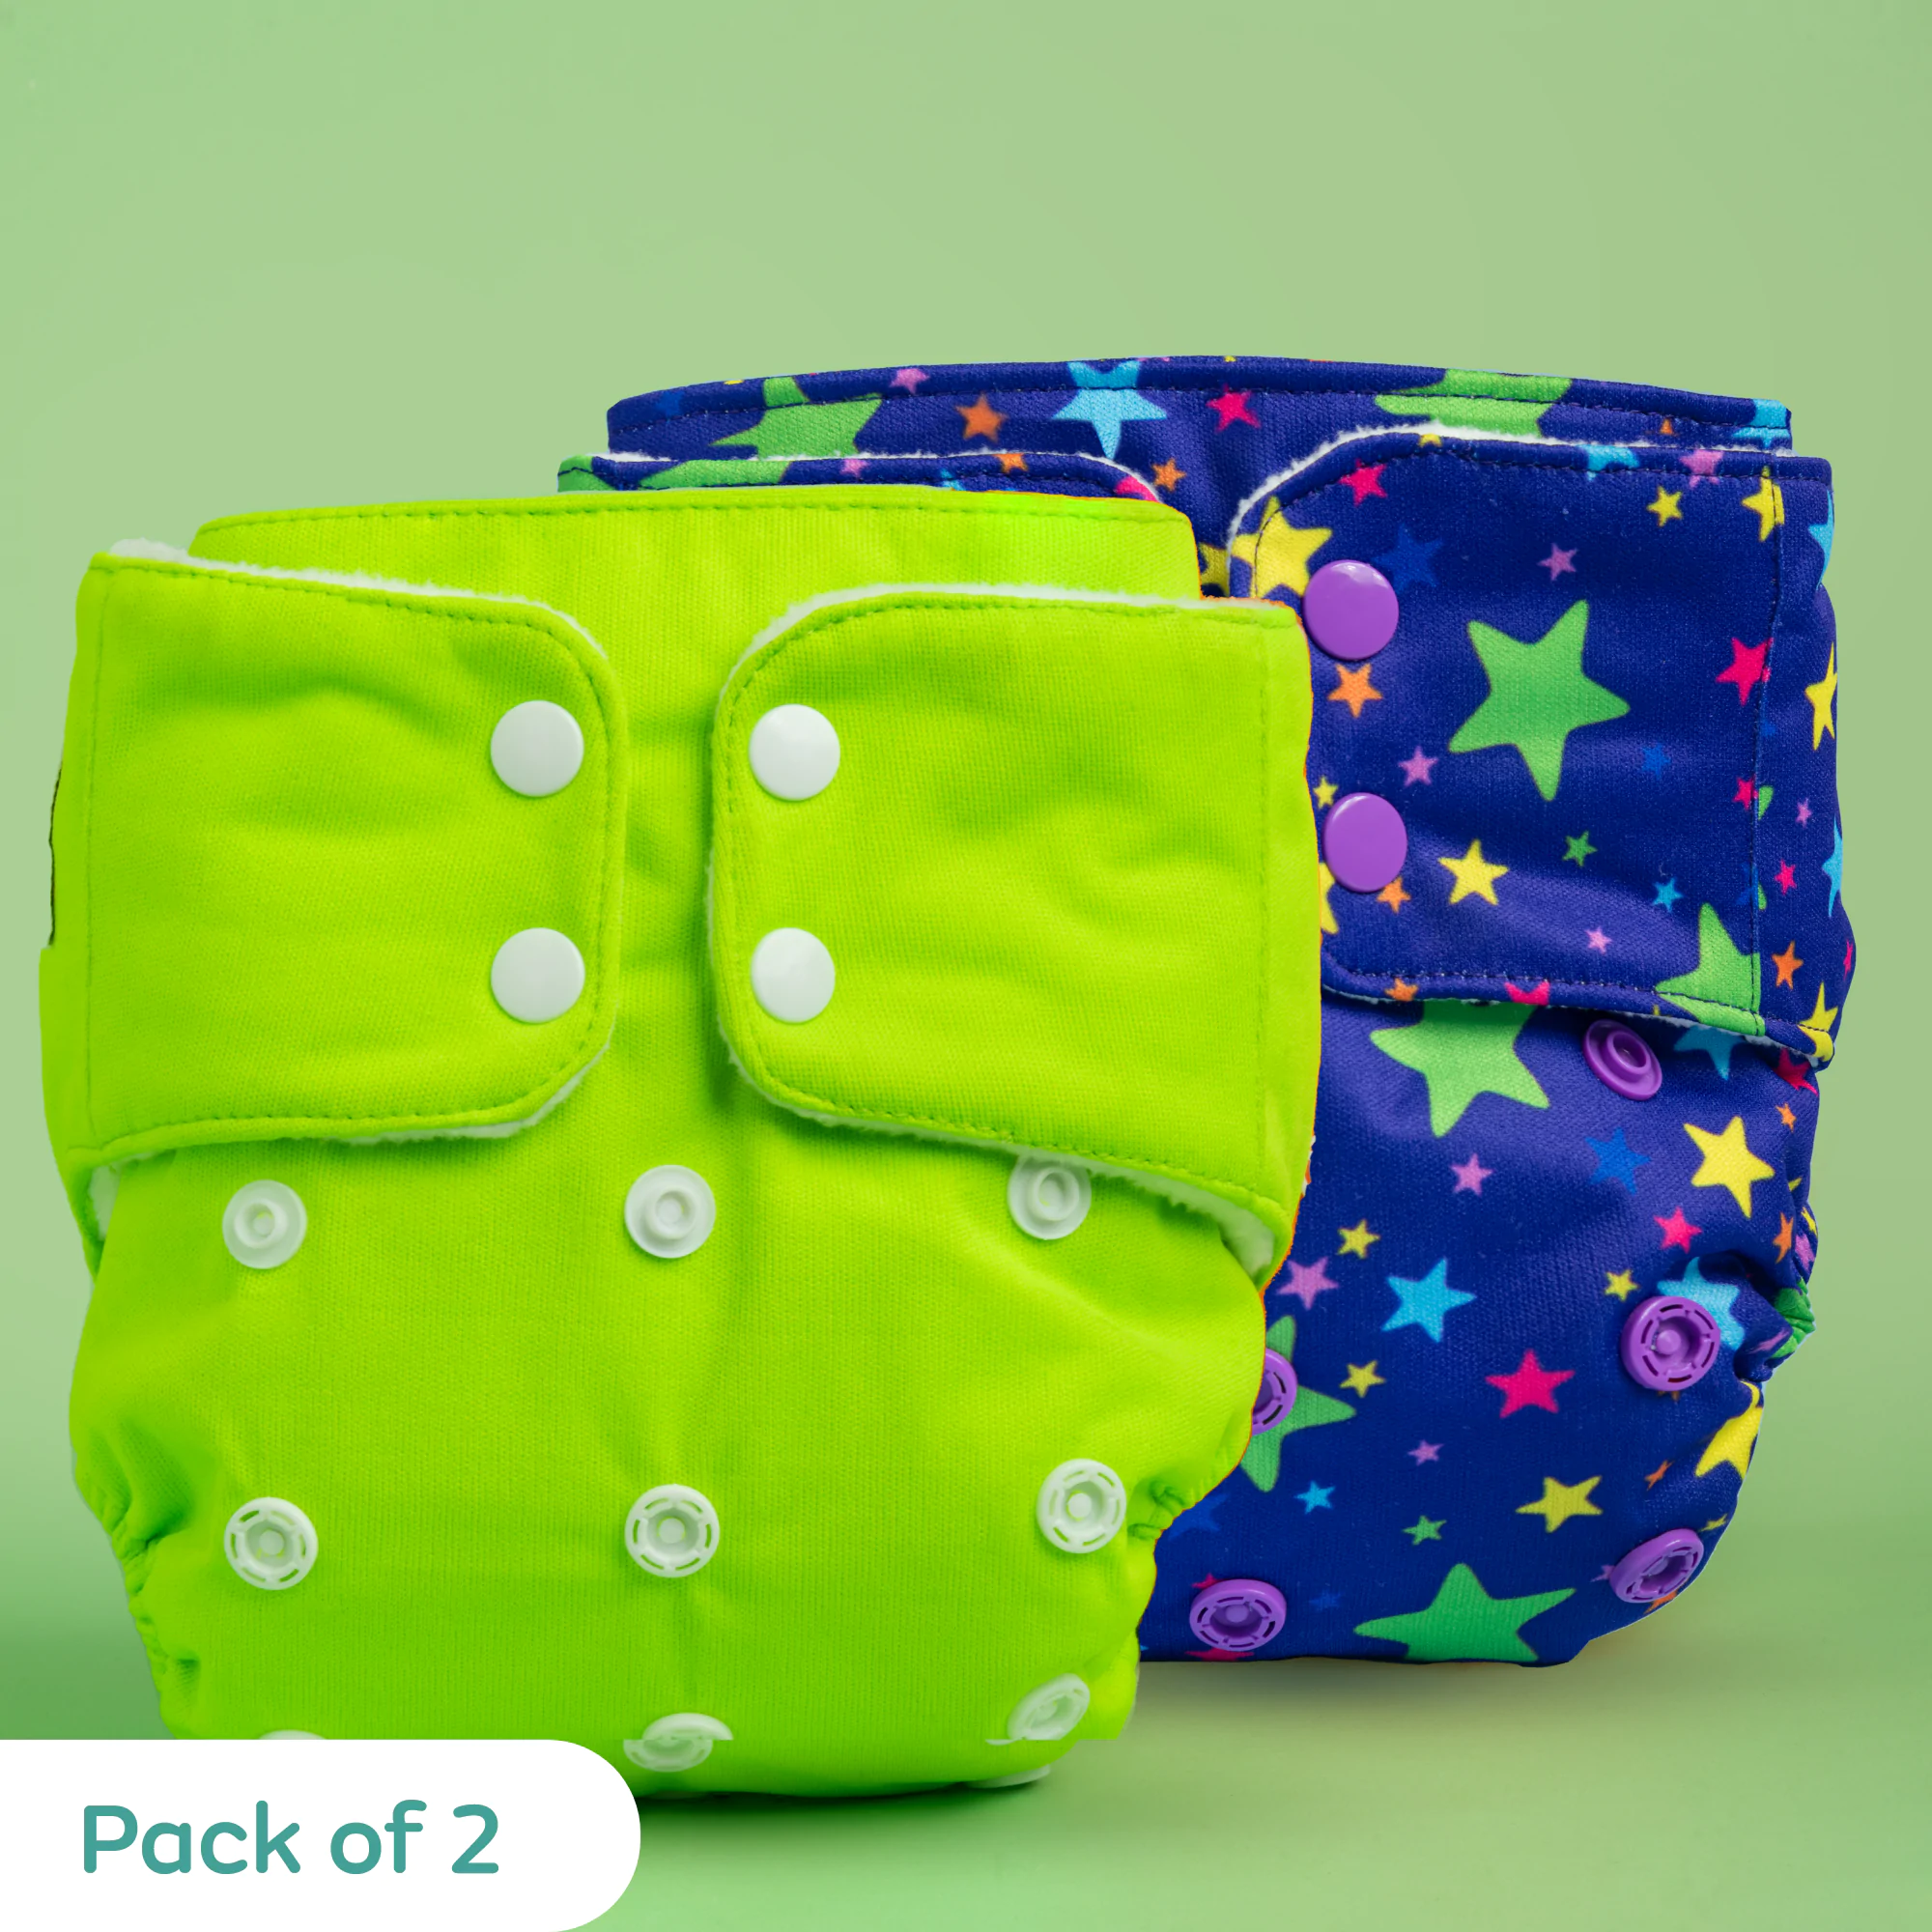 Free Size Washable & Reusable Cloth Diaper With 2 Dry Feel Absorbent Insert Pad ( 3 M - 3 Yrs) - Twinkle print -Green Solid